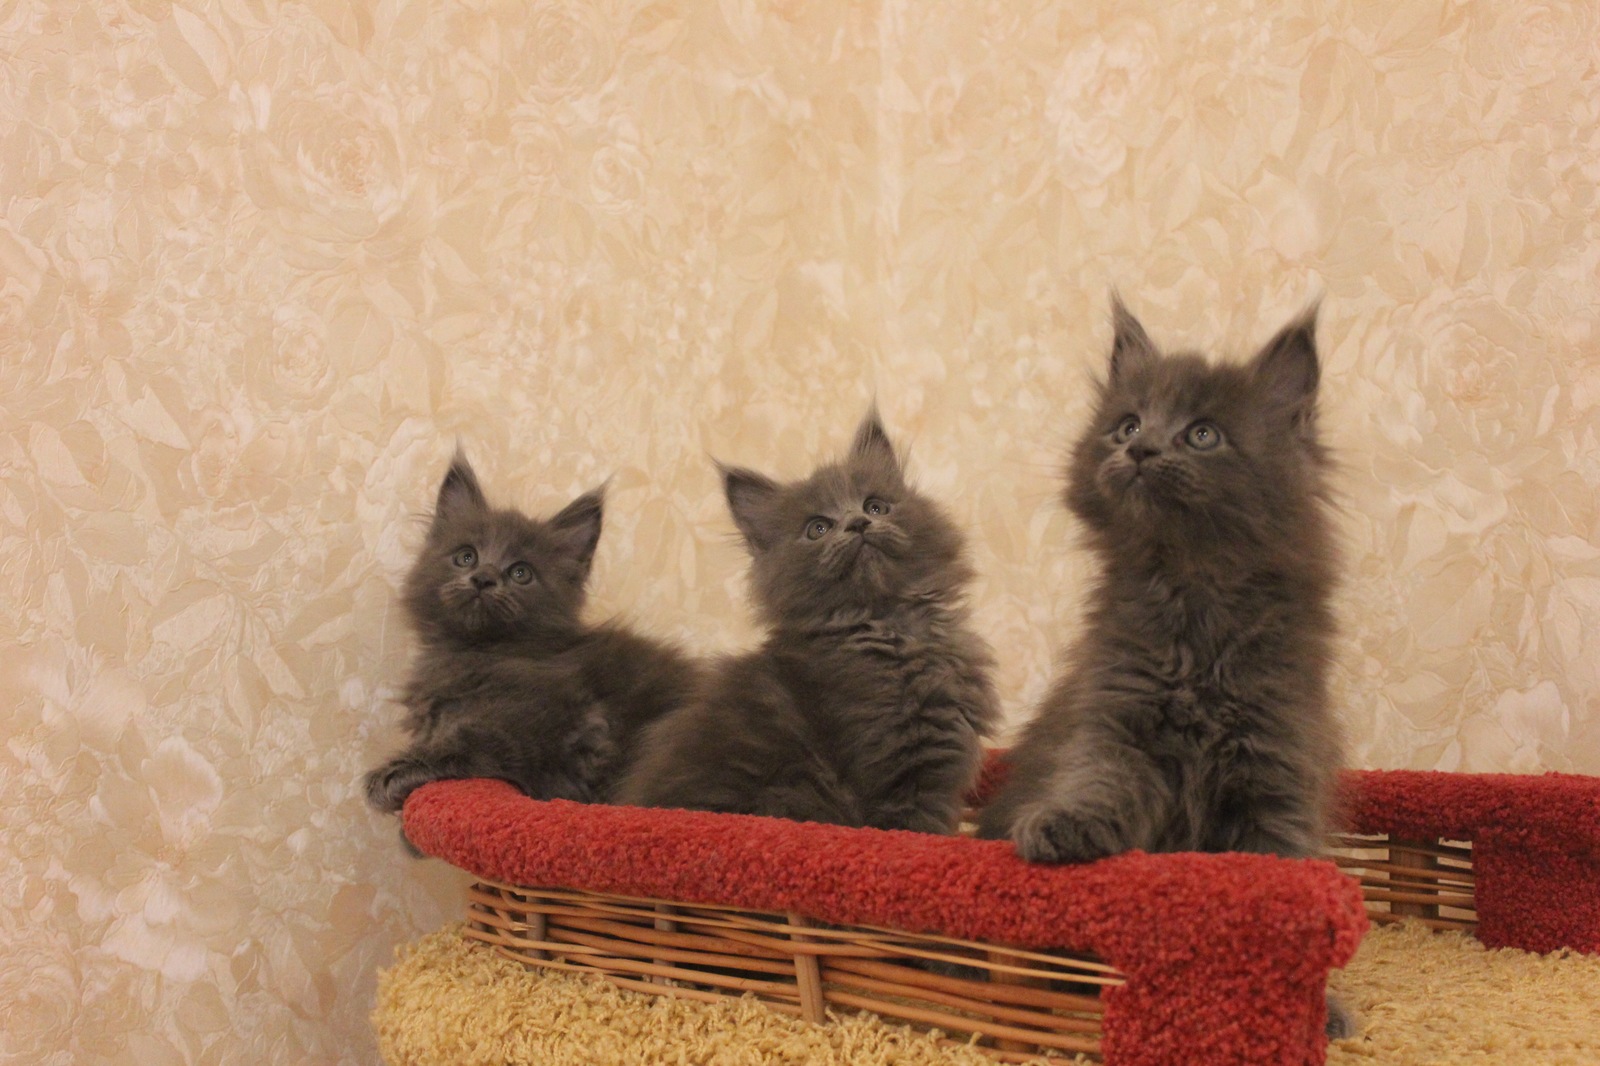 THE BIGGEST HOUSEHOLD CATS! - My, cat, Kittens, Maine Coon, , Catomafia, , Longpost